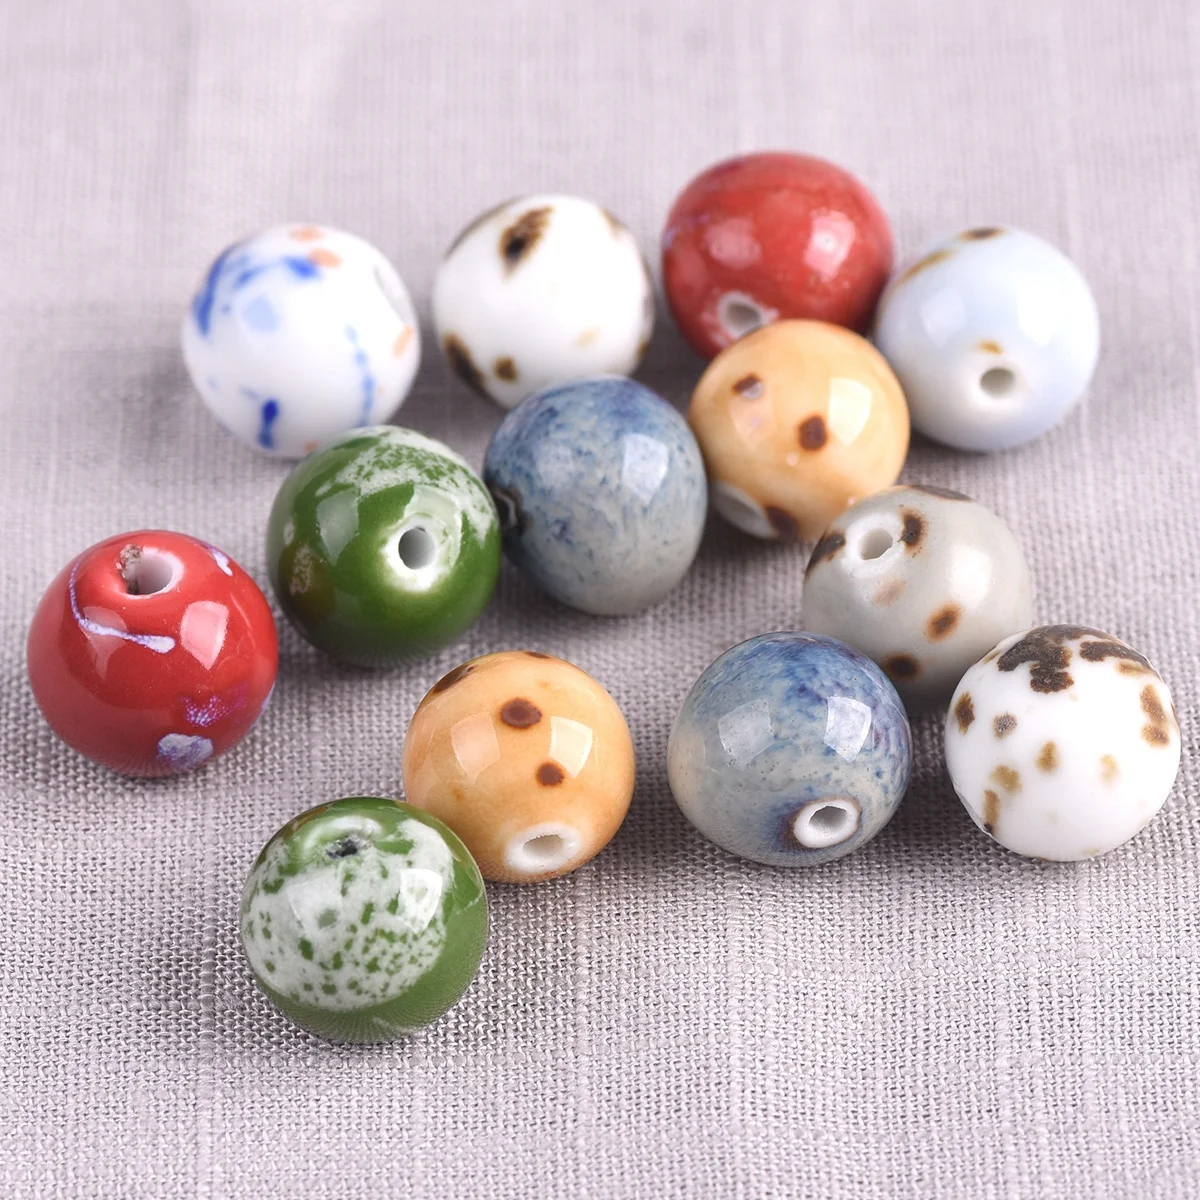 10pcs 14~15mm Random Mixed Round Ceramic Porcelain Handmade Loose Spacer Beads lot for DIY Crafts Jewelry Making